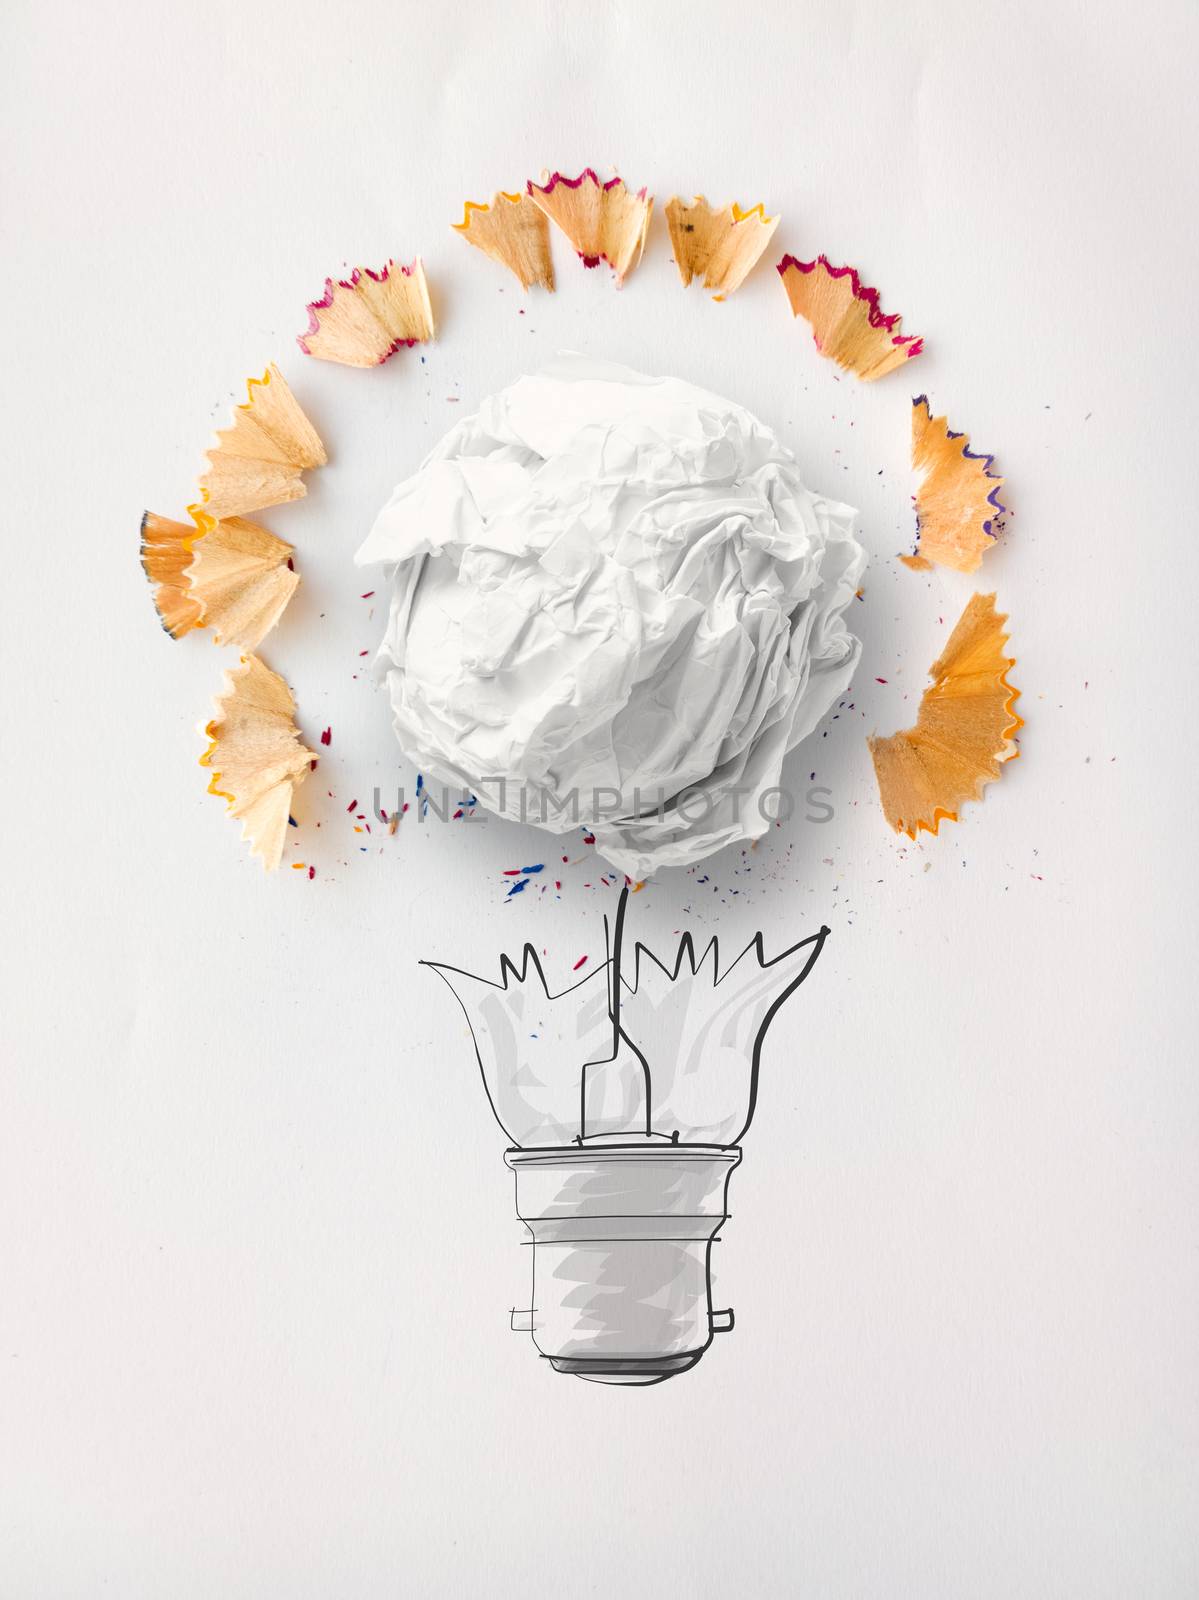 hand drawn light bulb and crumpled paper with pencil saw dust on paper background as creative concept